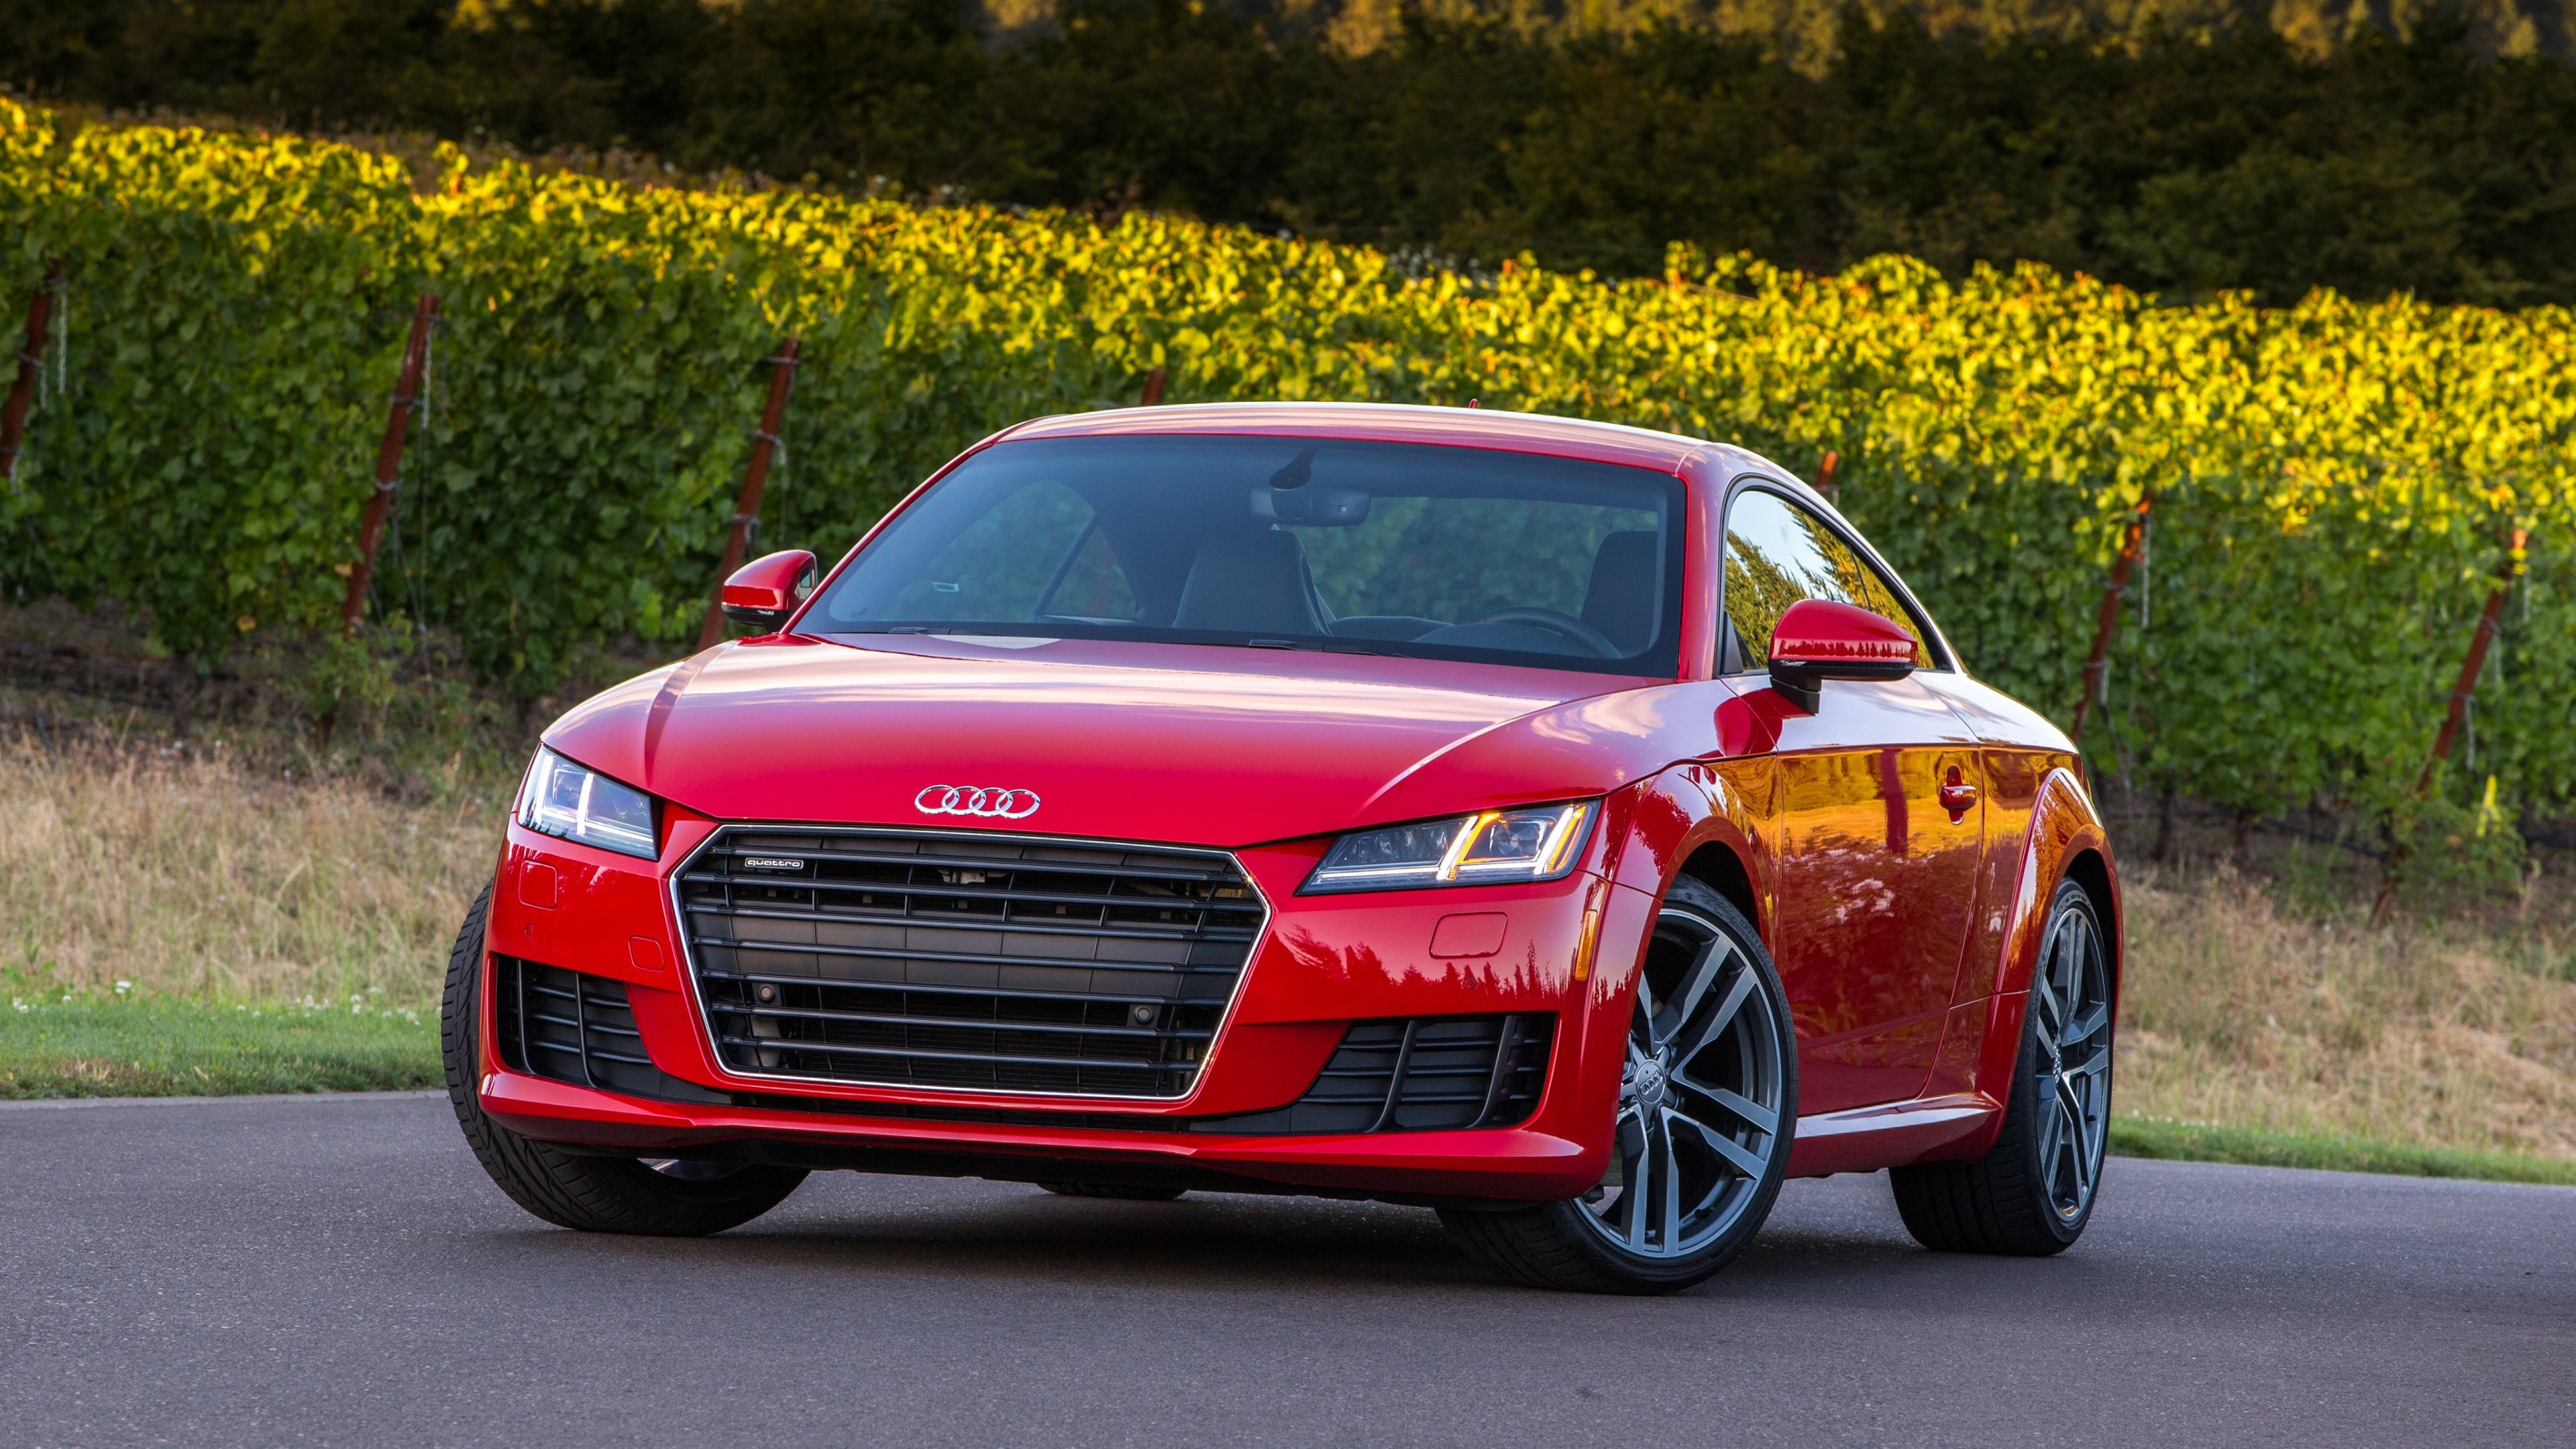 Red Audi Coupe on Road During Daytime. Wallpaper in 3840x2160 Resolution